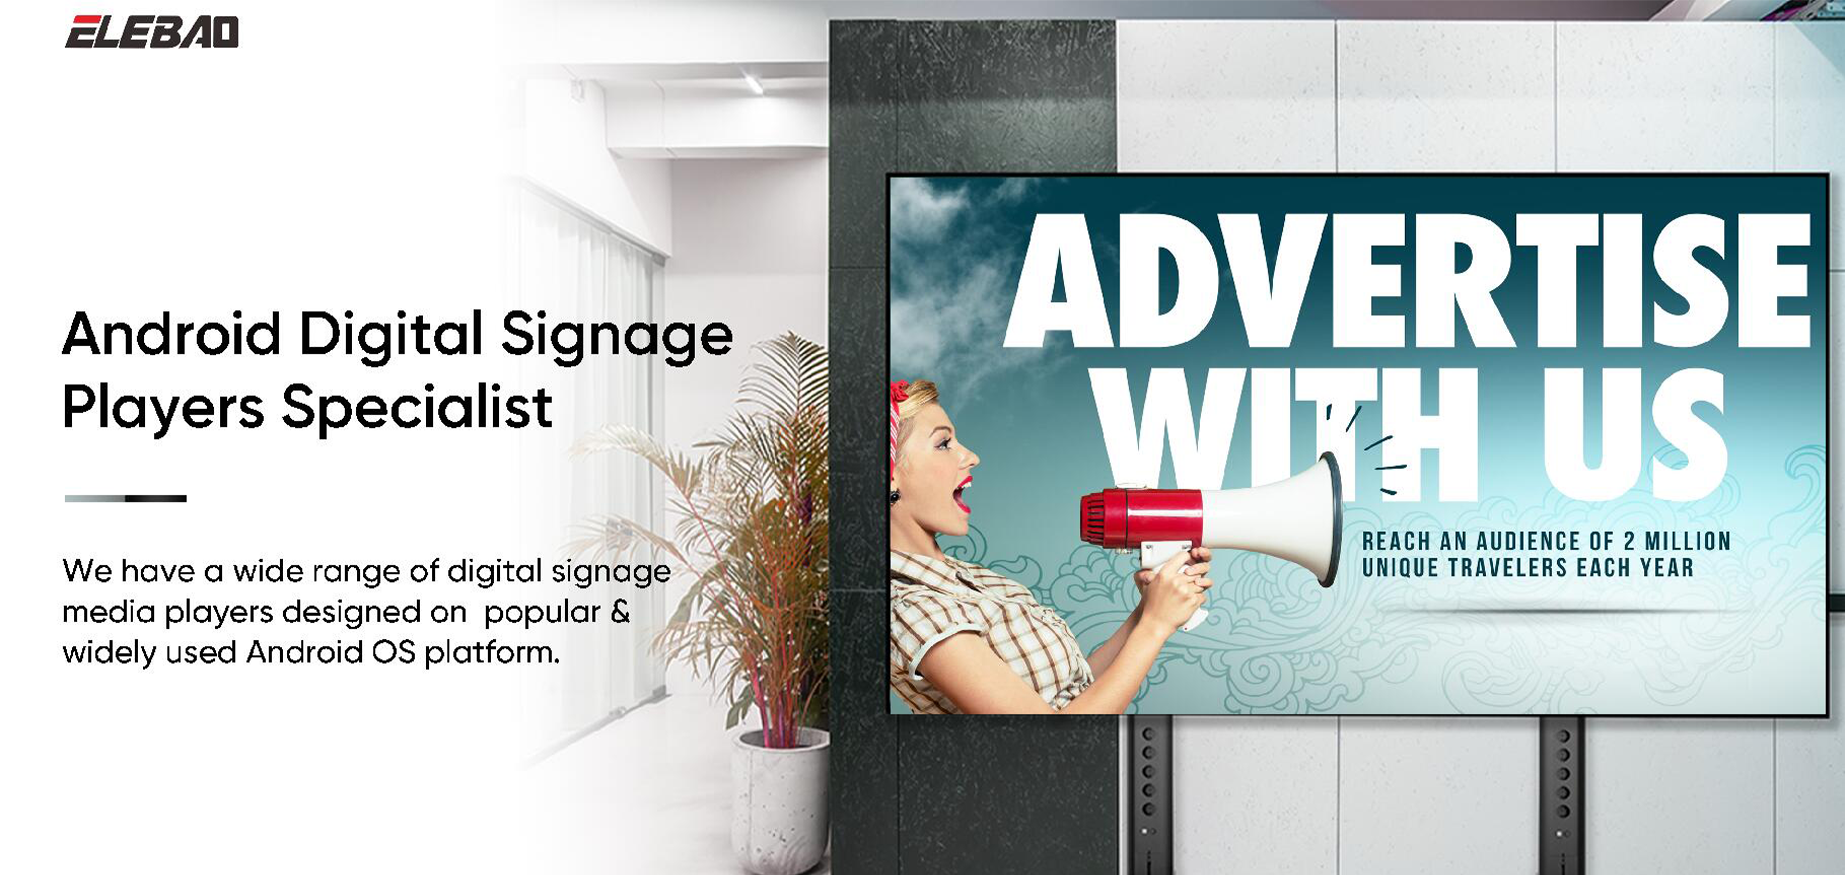 Elebao supply reliable digital signage solutions for Commercial customers